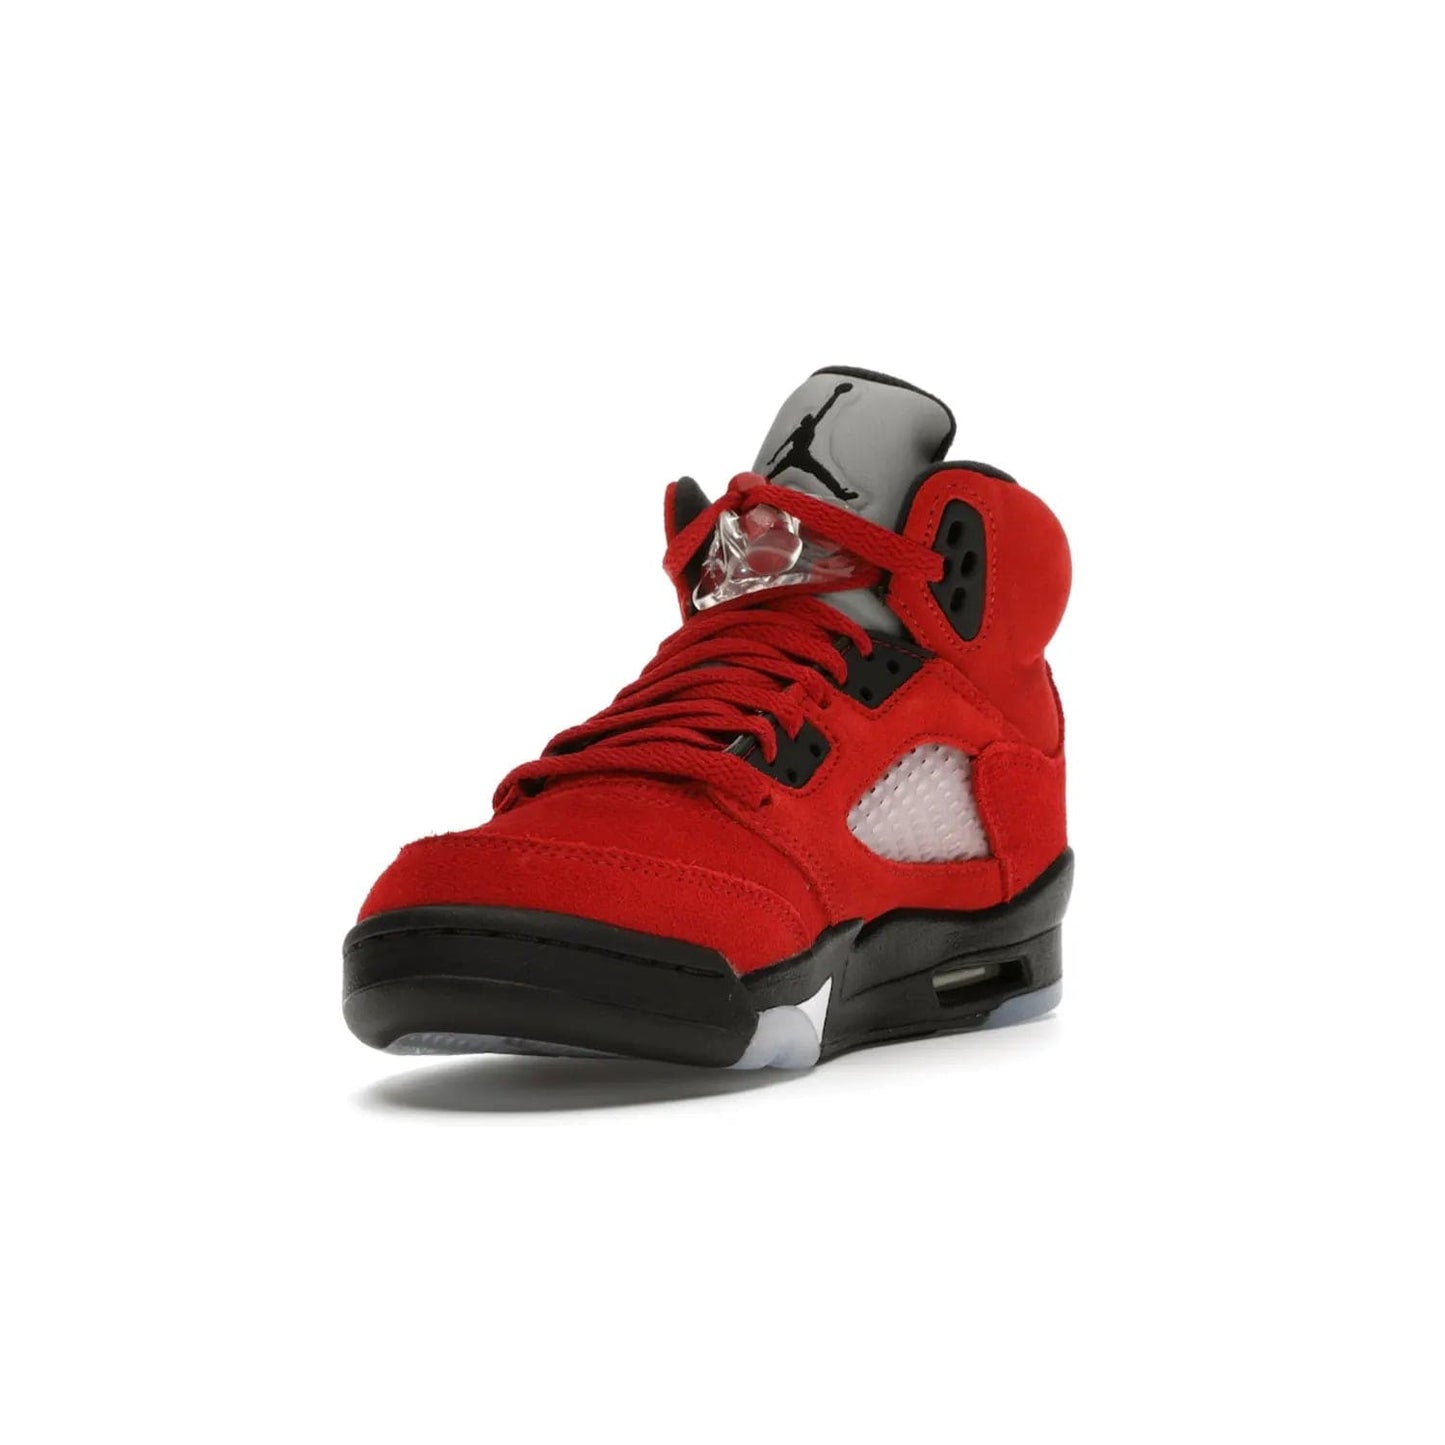 Jordan 5 Retro Raging Bull Red (2021) (GS) - Image 13 - Only at www.BallersClubKickz.com - Jordan 5 Retro Raging Bulls Red 2021 GS. Varsity Red suede upper with embroidered number 23, black leather detail, red laces, and midsole with air cushioning. Jumpman logos on tongue, heel, and outsole. On-trend streetwear and basketball style. Released April 10, 2021.